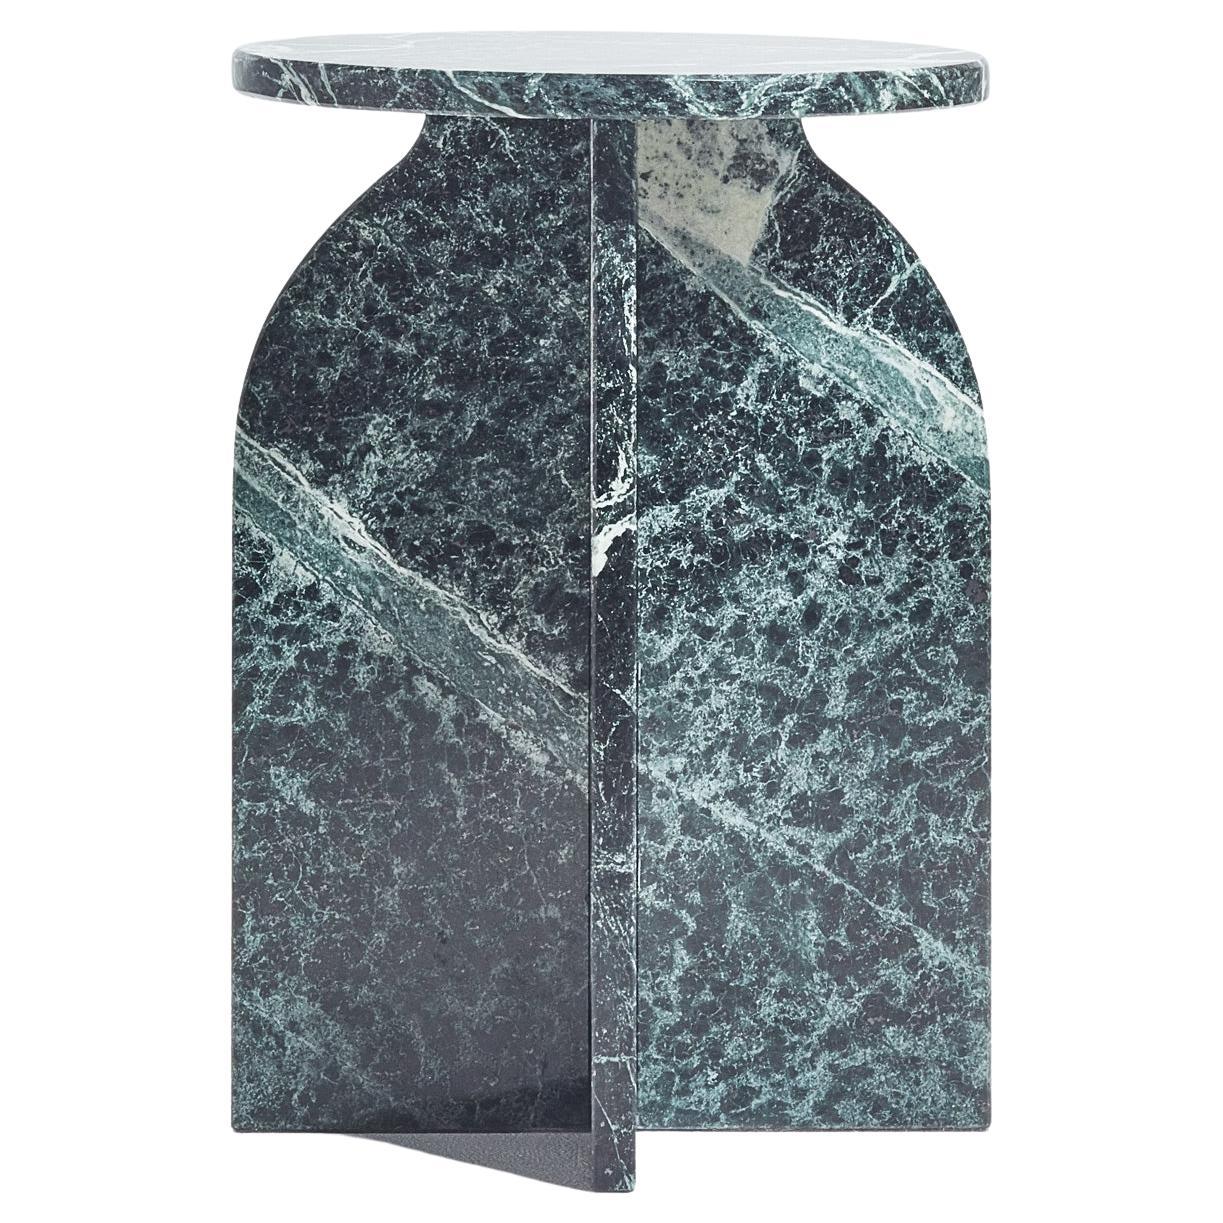 Plus side table in Green Marble, stone Minimalist Side Table by Aparentment  For Sale